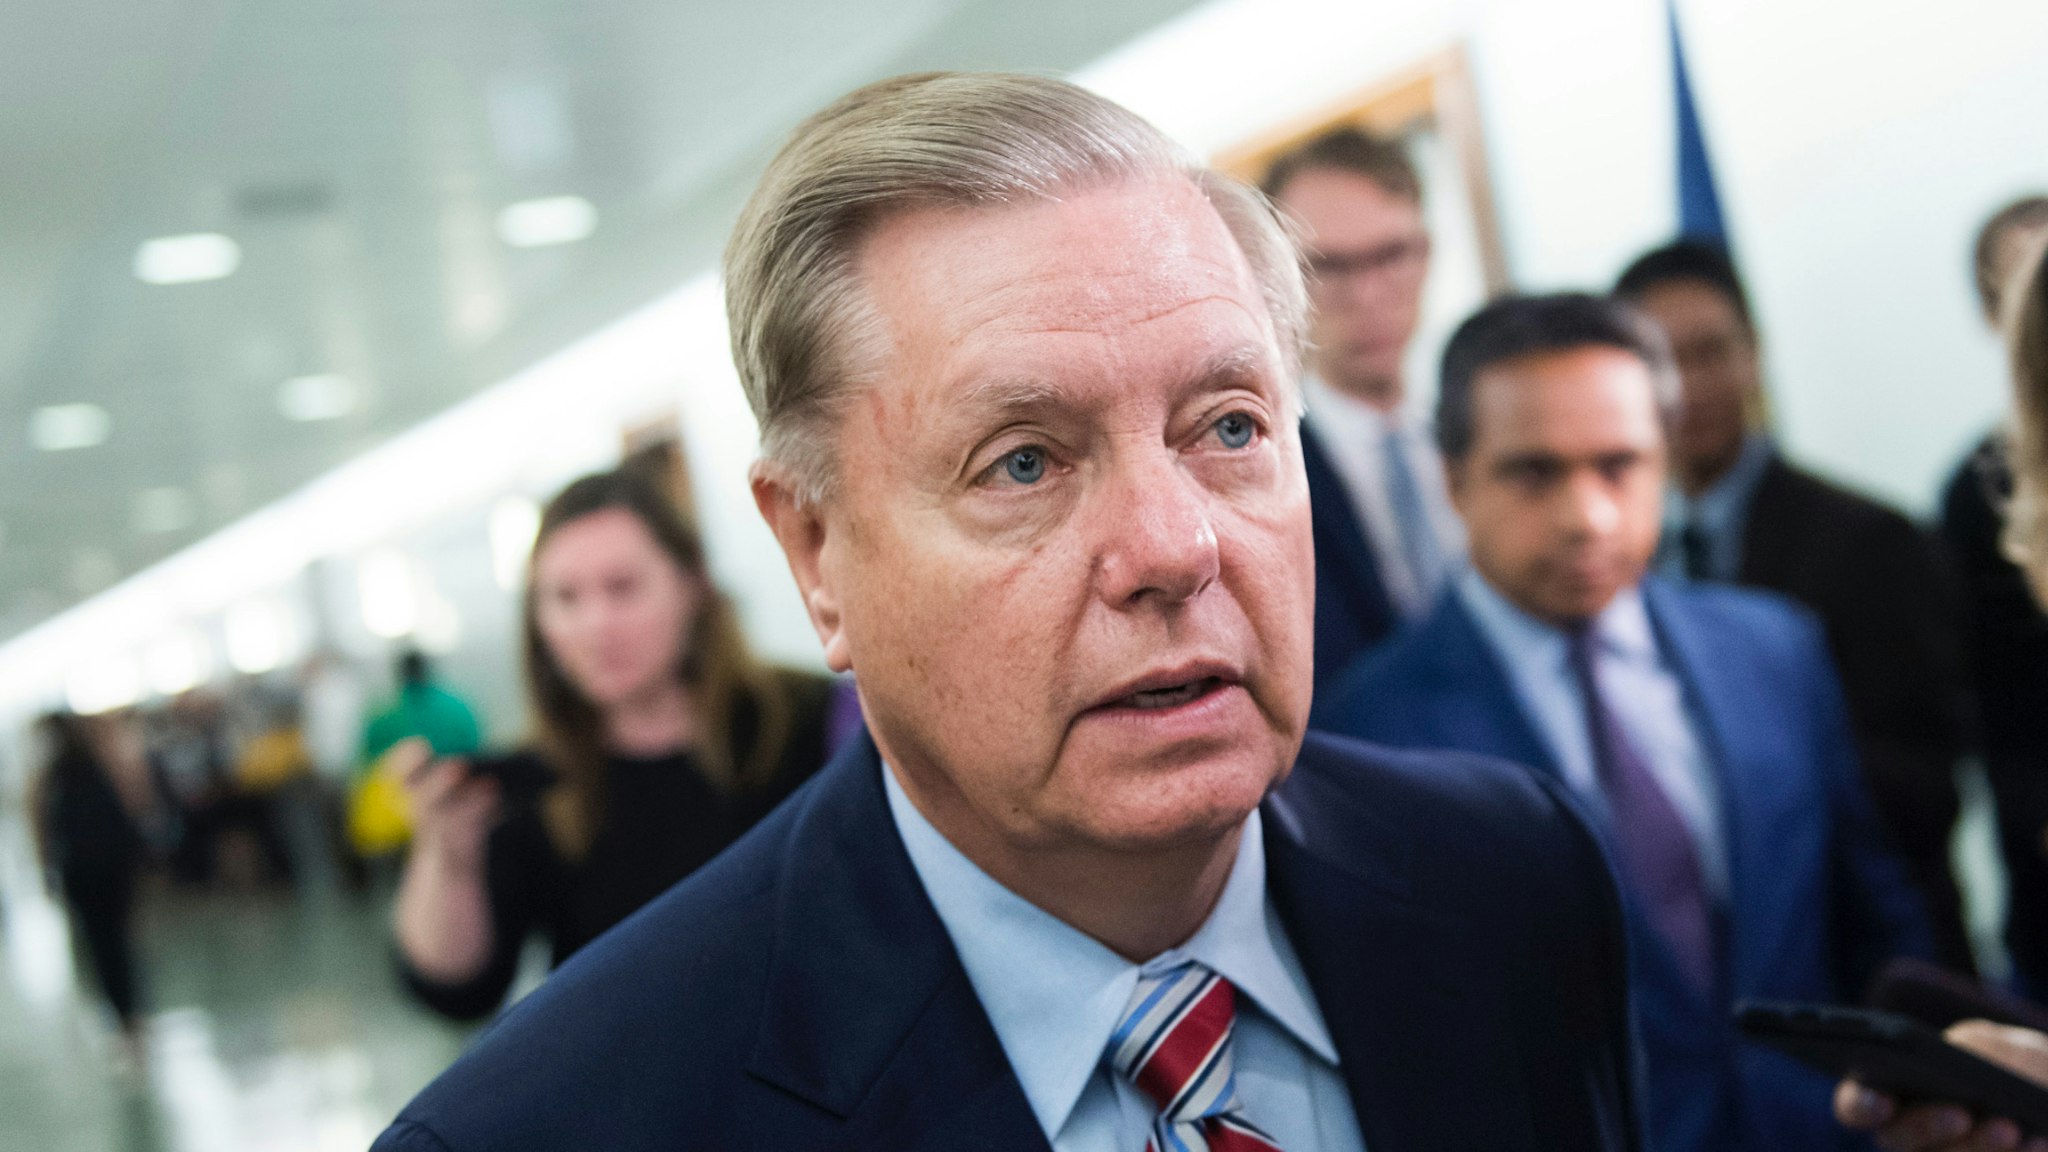 Chairman Lindsey Graham, R-S.C., arrives for the Senate Judiciary Committee hearing in Dirksen Building titled "Oversight of the Federal Bureau of Investigation," on Tuesday, JuLY 23, 2019.